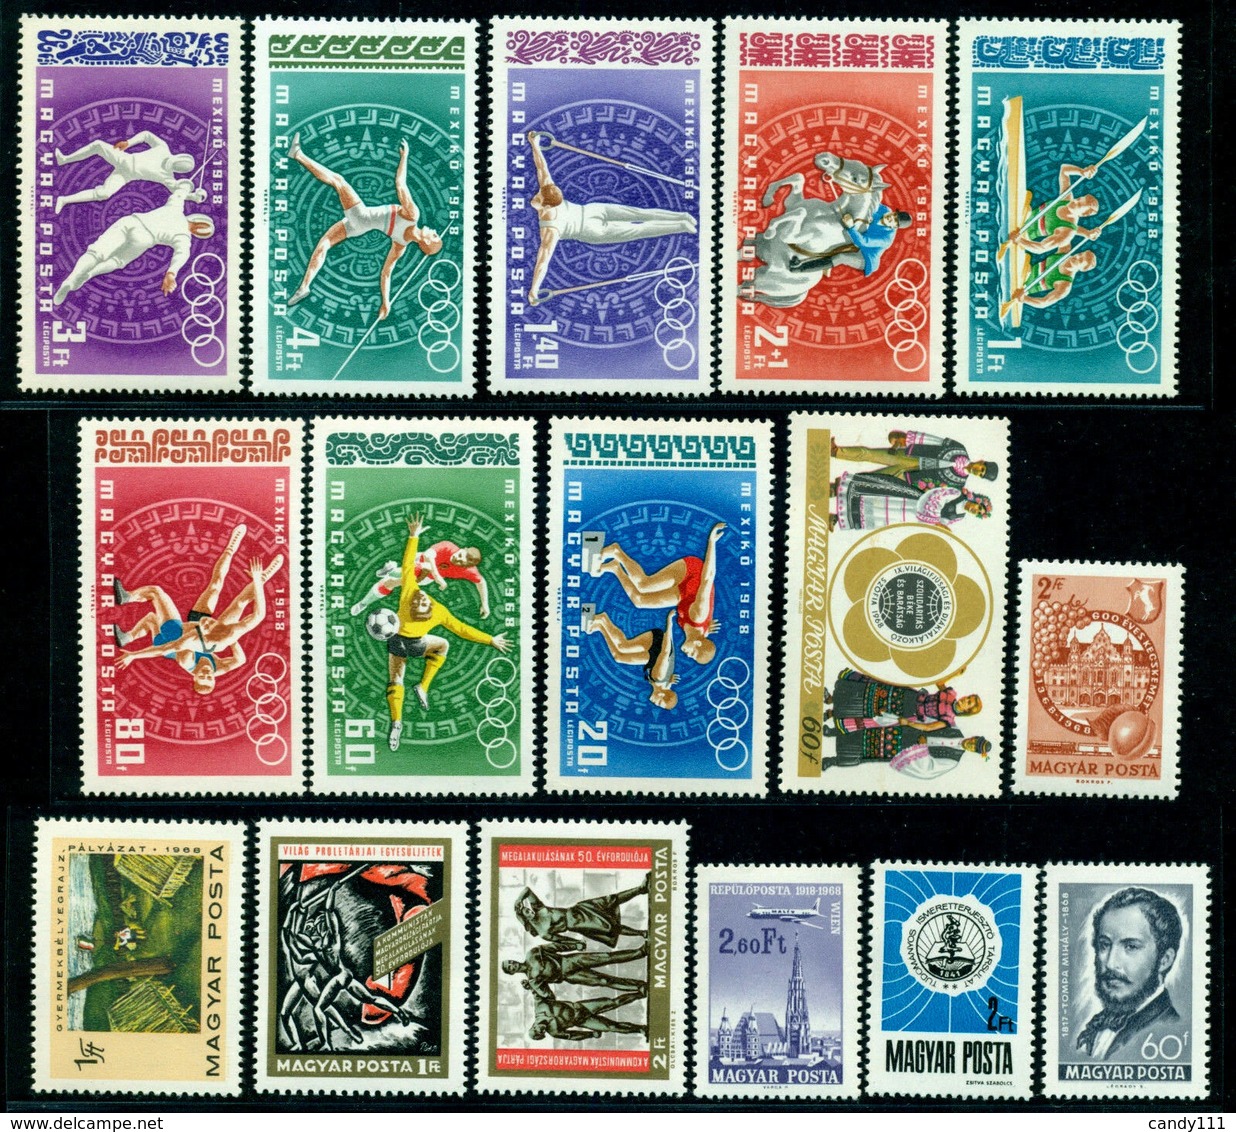 1968 Hungary,Ungarn,Hongrie,Ungheria,Ungaria,Year Set/JG =70 Stamps+6 S/s,MNH - Annate Complete